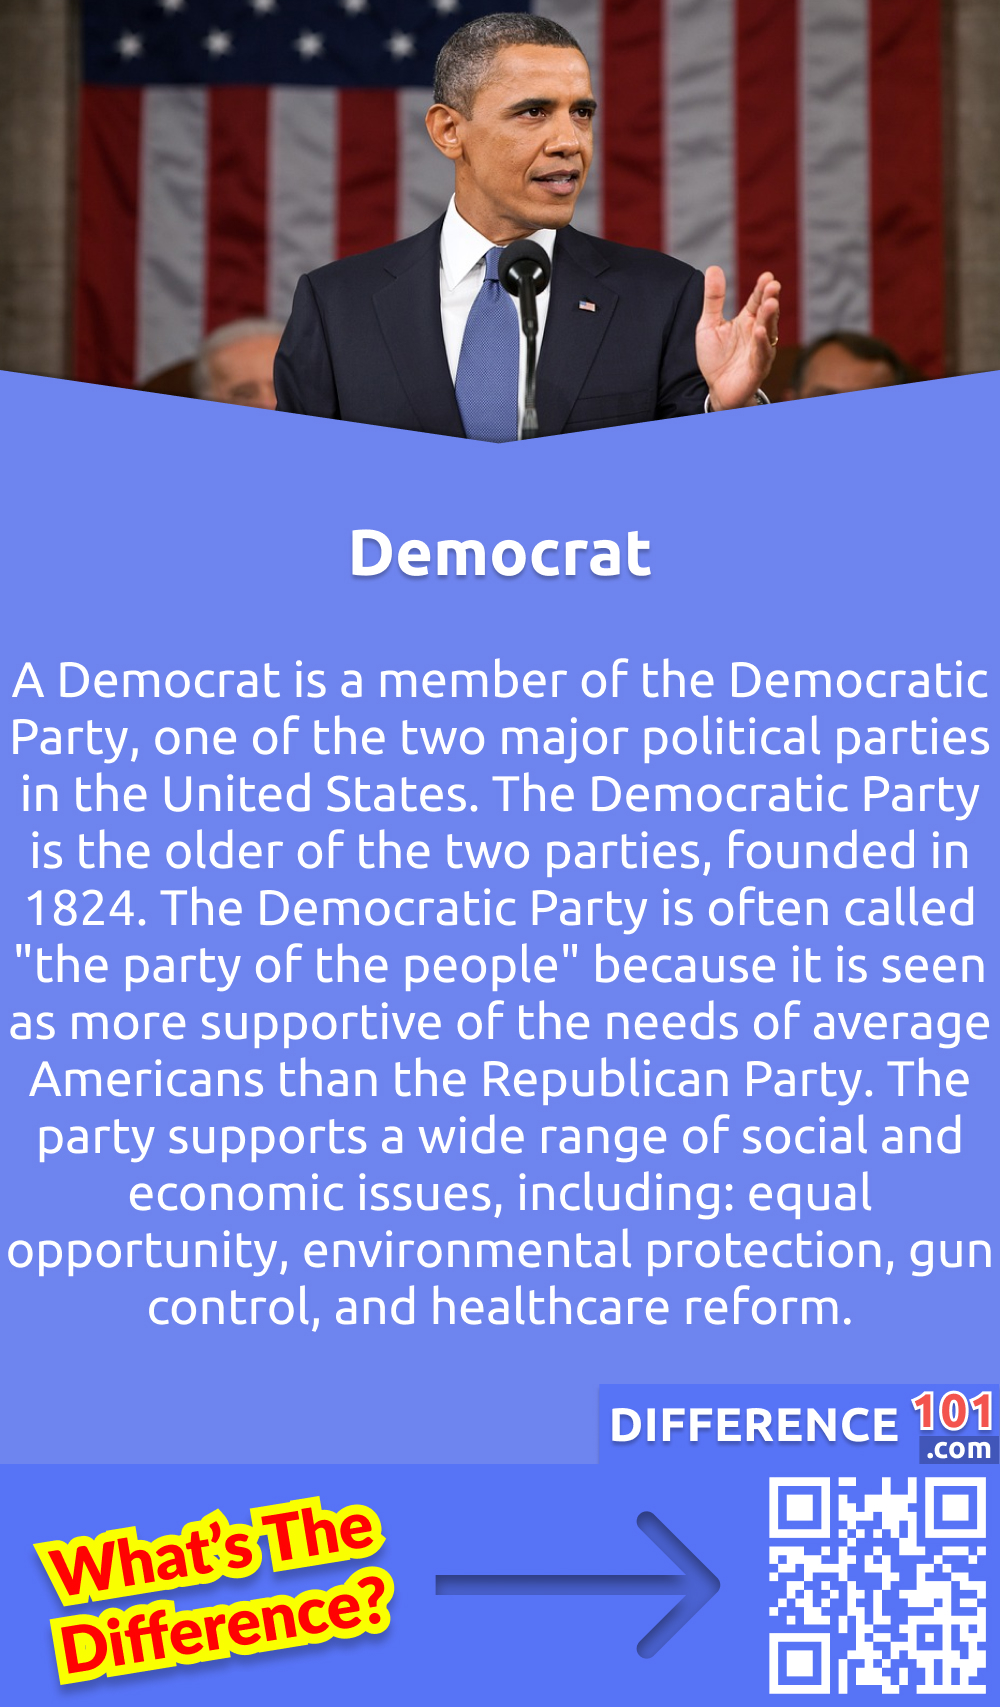 What Is Democrat? A Democrat is a member of the Democratic Party, one of the two major political parties in the United States. The Democratic Party is the older of the two parties, founded in 1824. The Democratic Party is often called "the party of the people" because it is seen as more supportive of the needs of average Americans than the Republican Party. The party supports a wide range of social and economic issues, including: equal opportunity, environmental protection, gun control, and healthcare reform.
